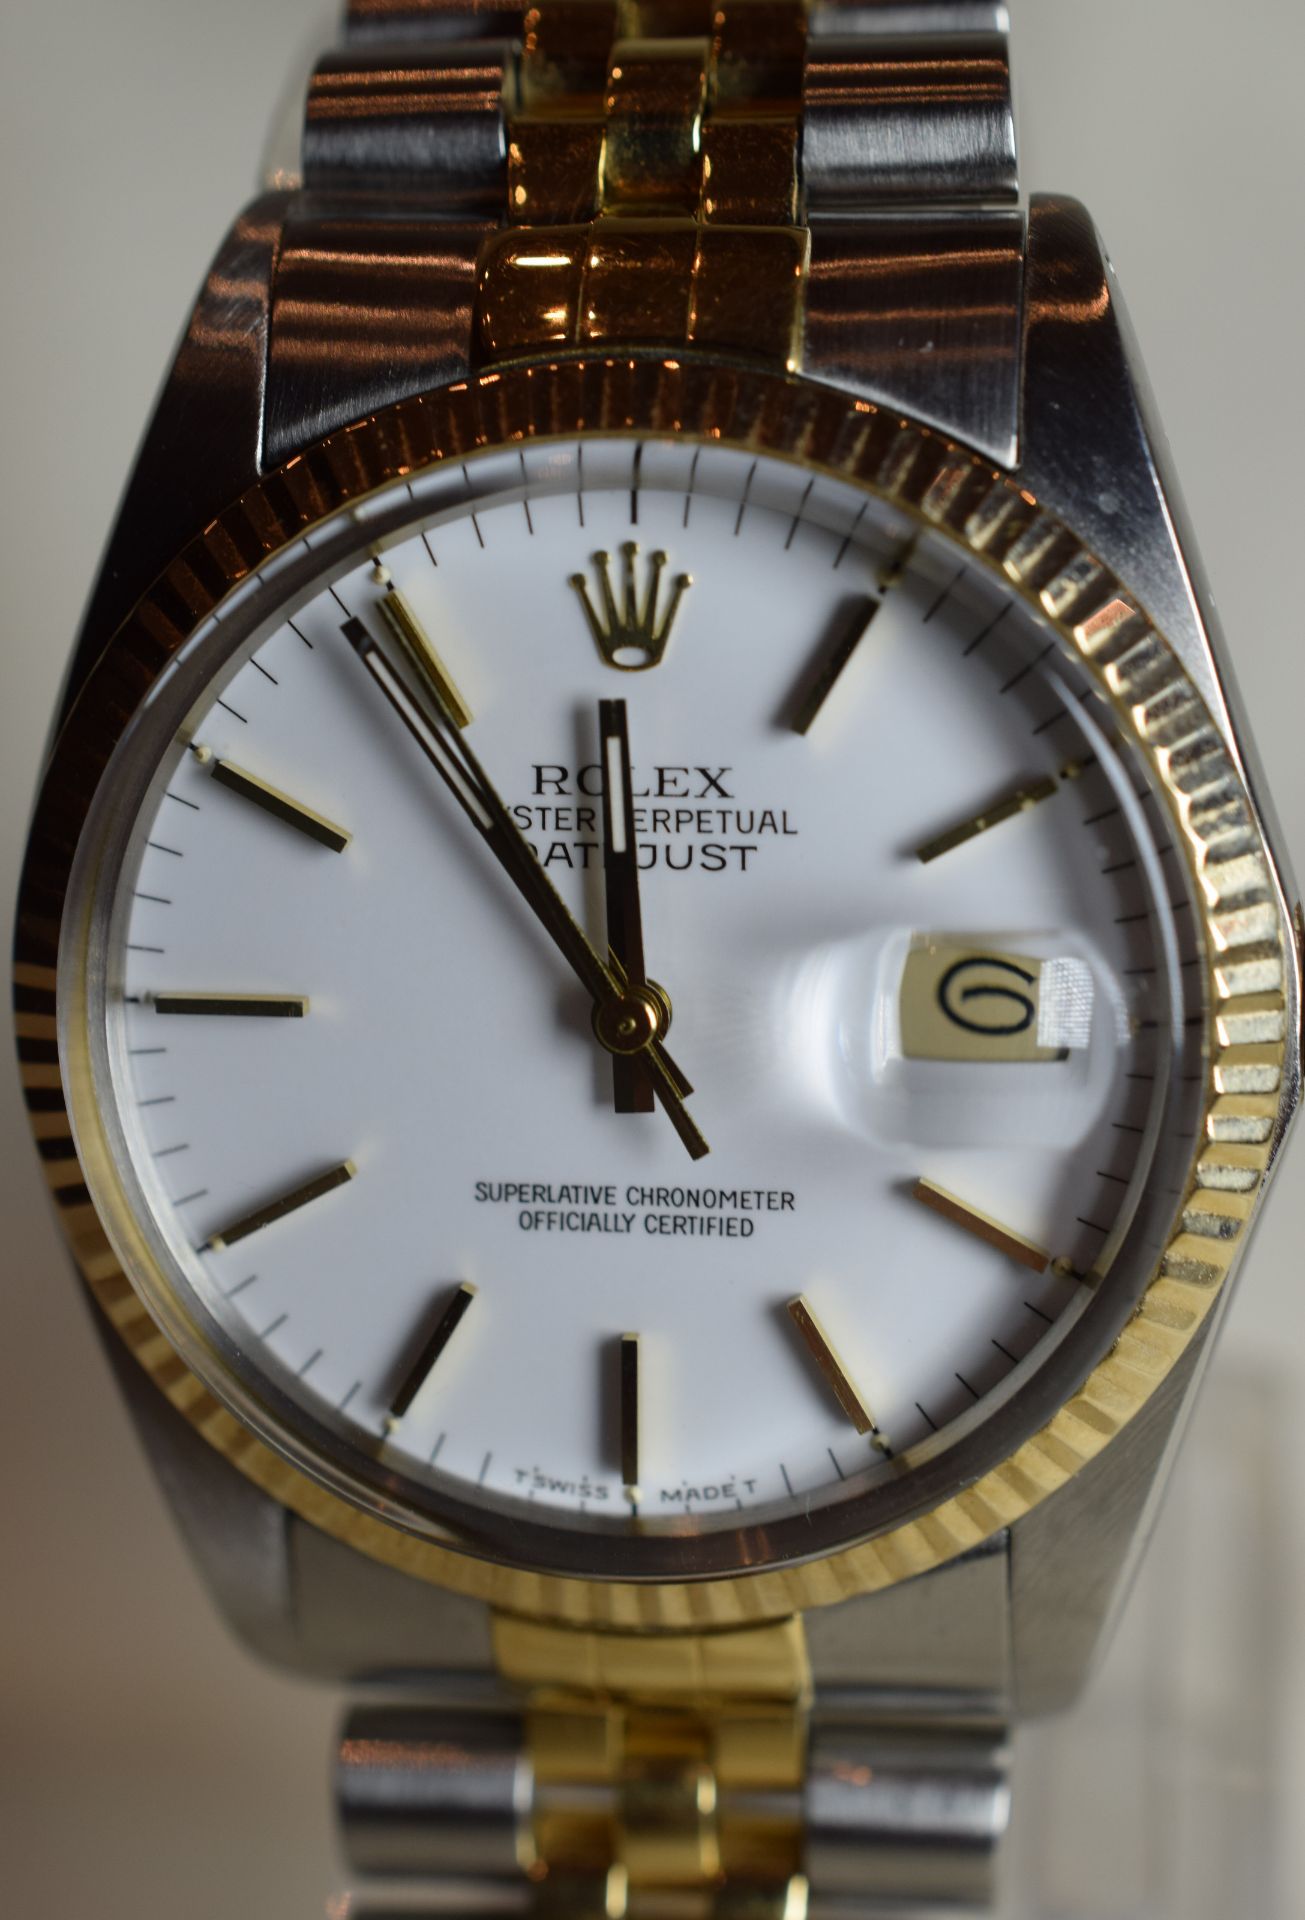 Rolex Oyster Perpetual Datejust 18ct Gold And Stainless Steel Chronometer ***reserve lowered*** - Image 5 of 9